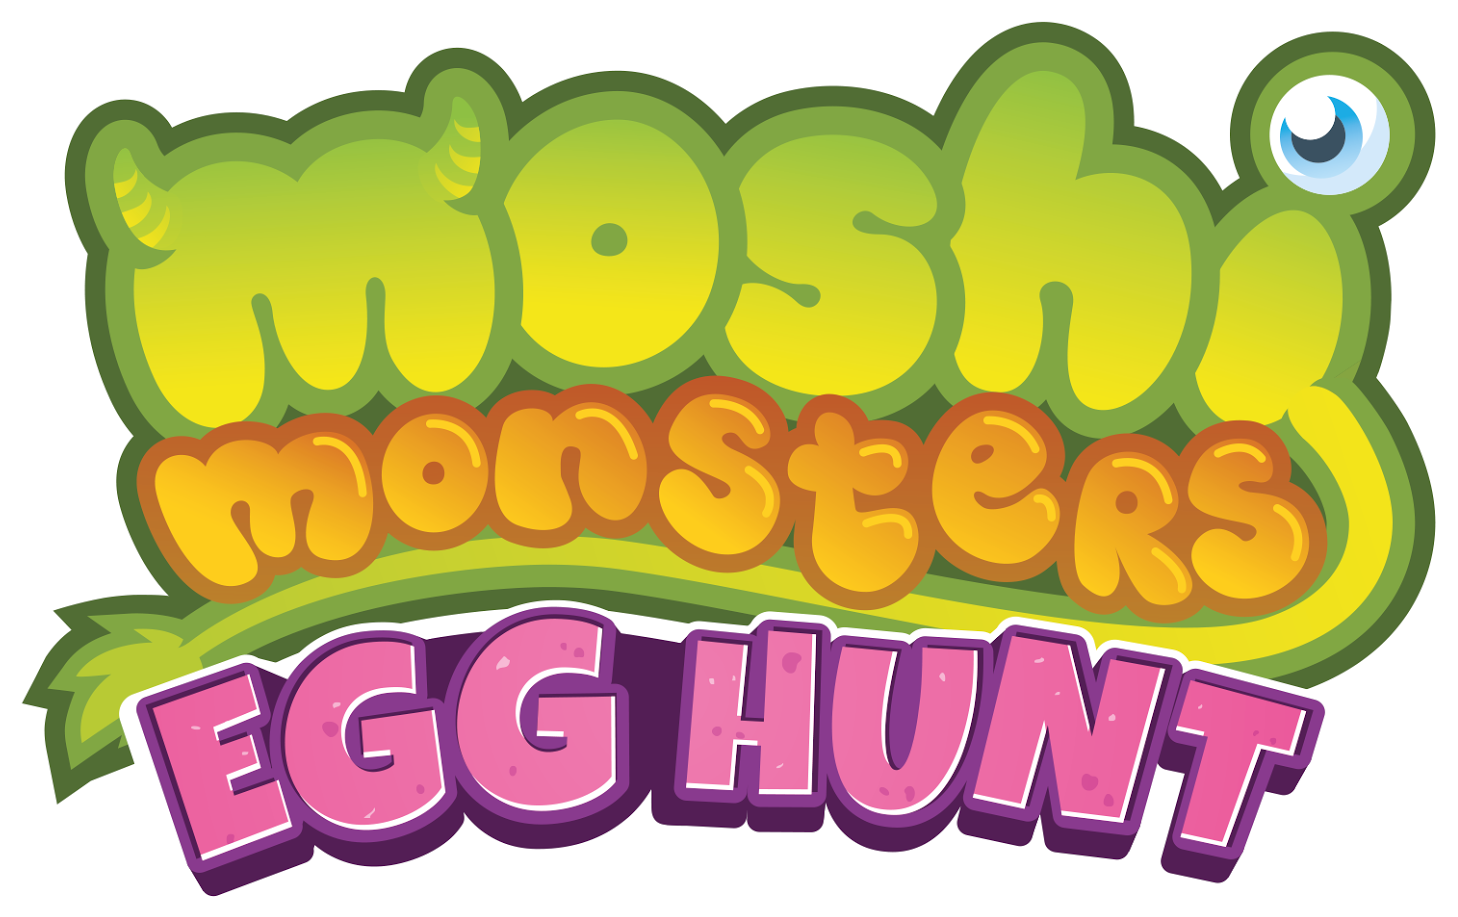 Moshi Monsters Egg Hunt Mobile Game & Trading Card - Moshi Monsters Buster's Lost Moshlings (1600x1008)